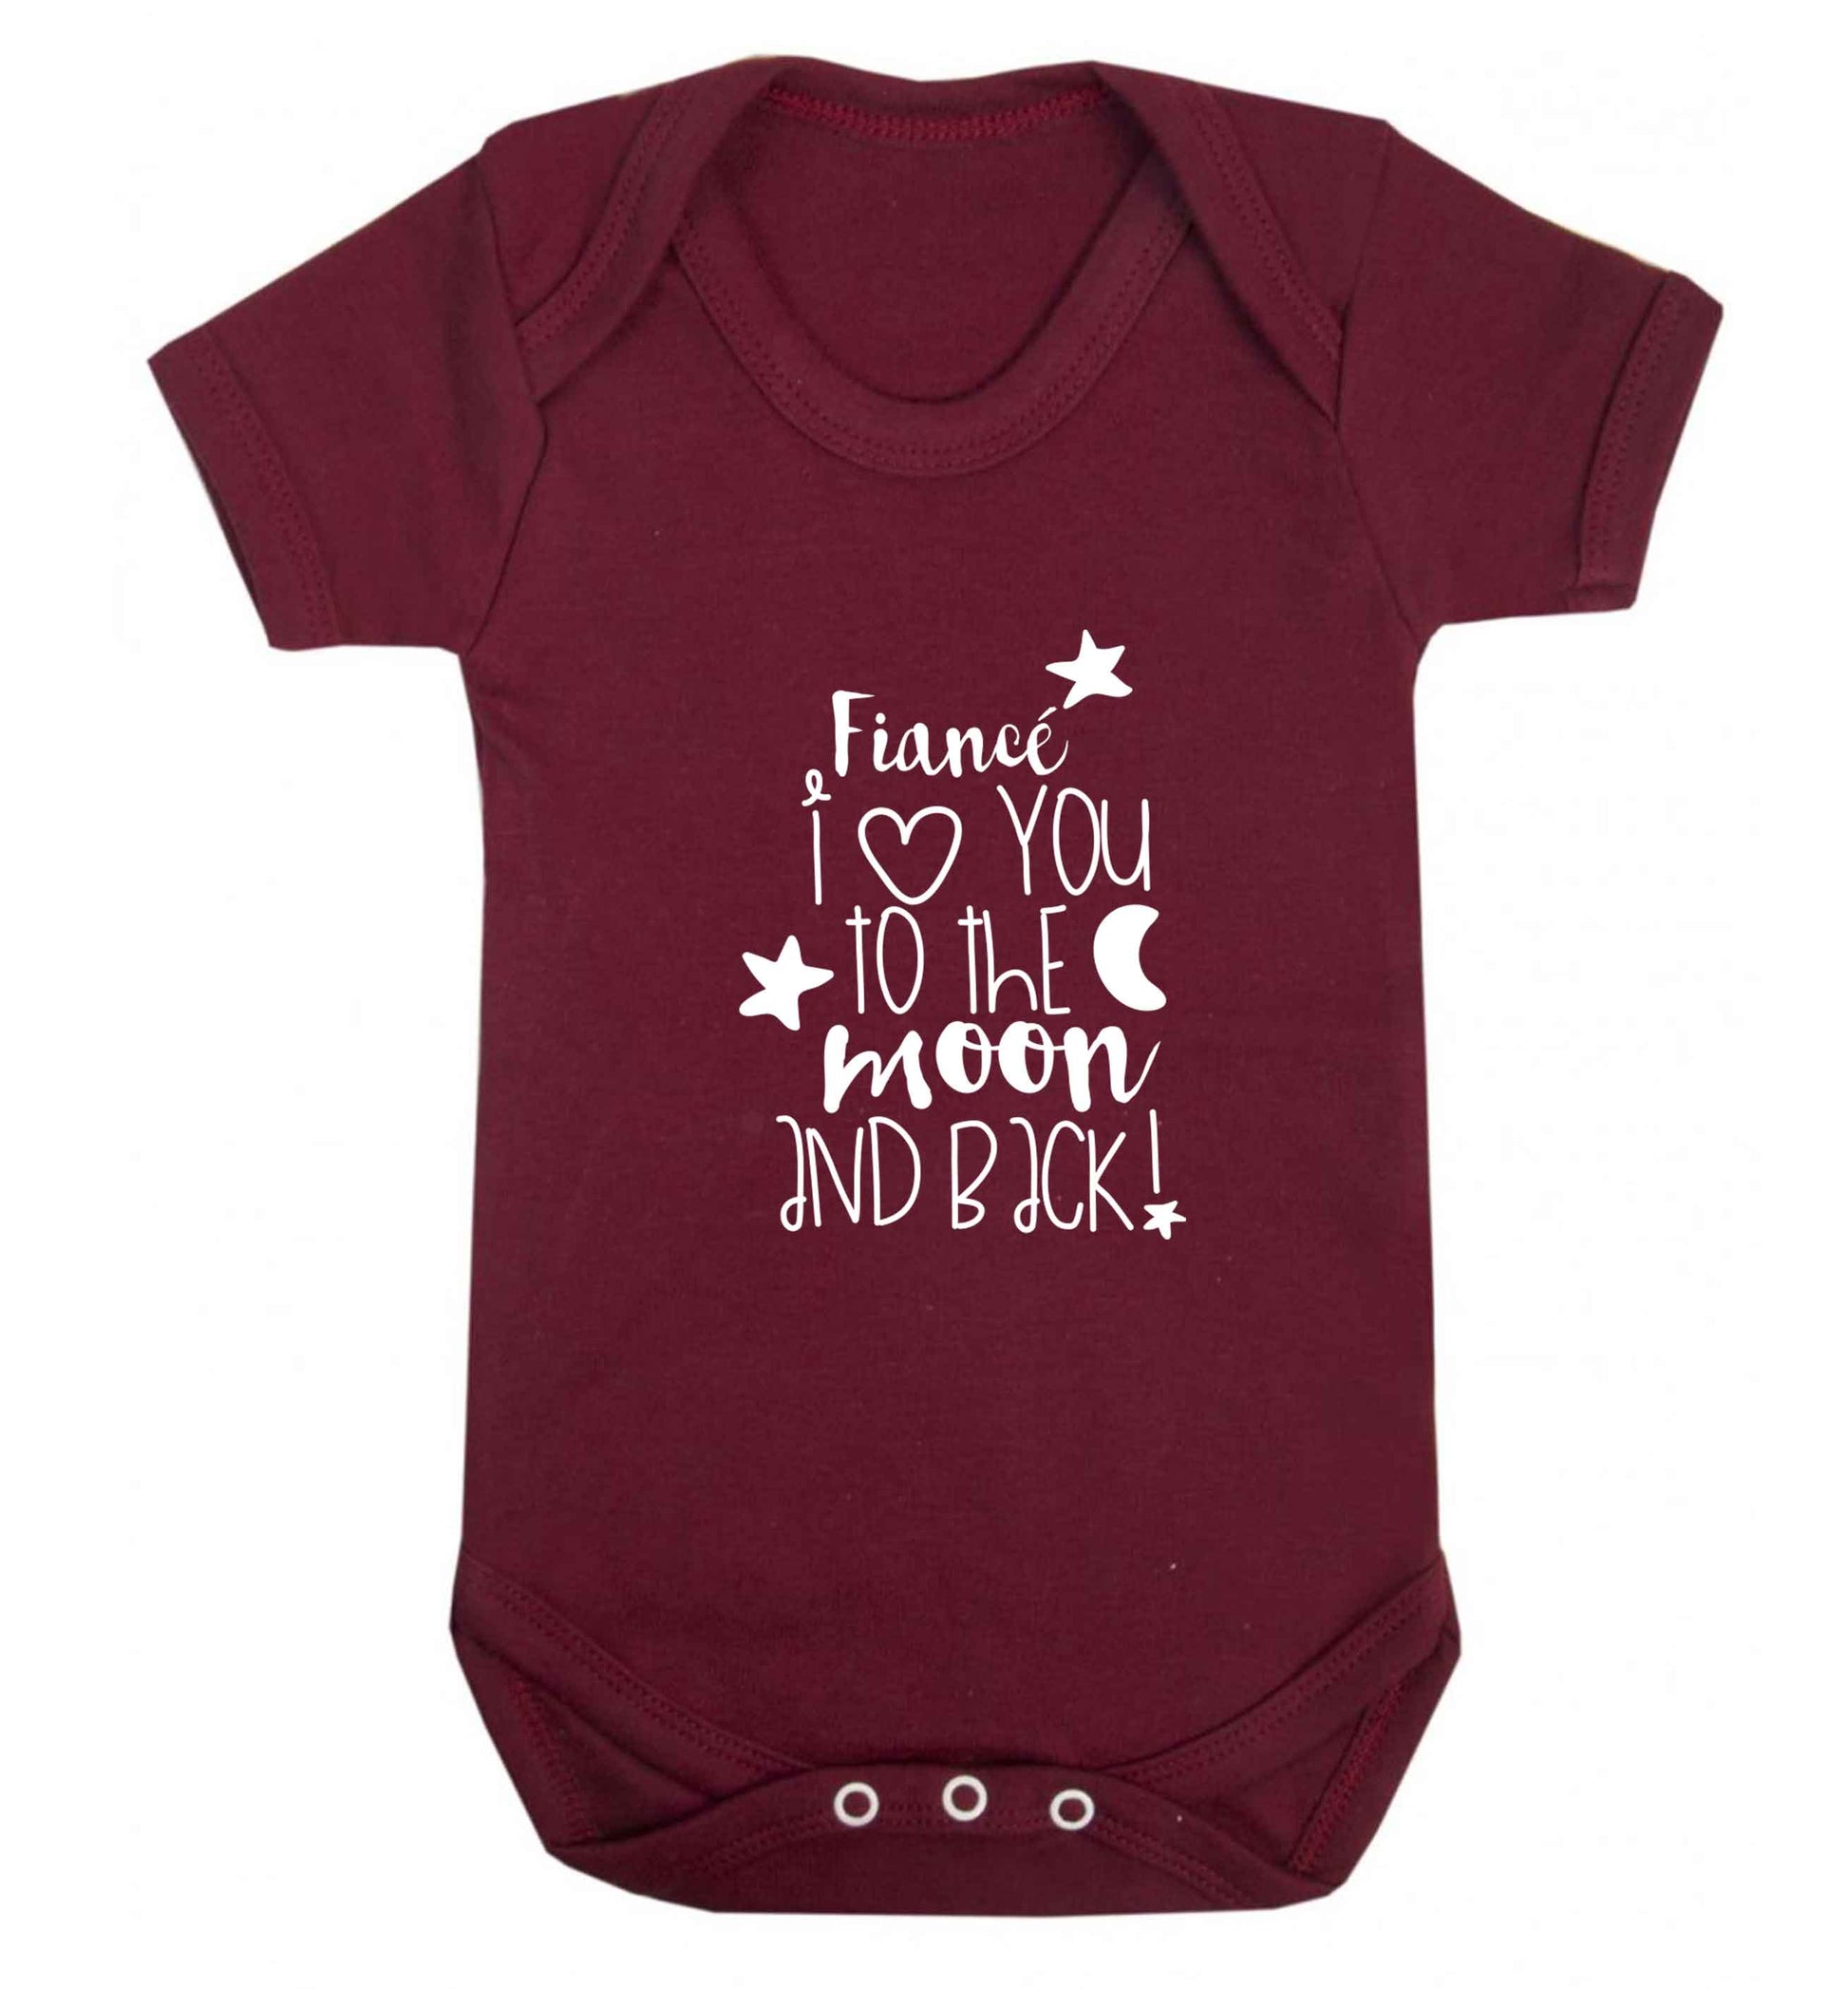 Fianc√© I love you to the moon and back baby vest maroon 18-24 months